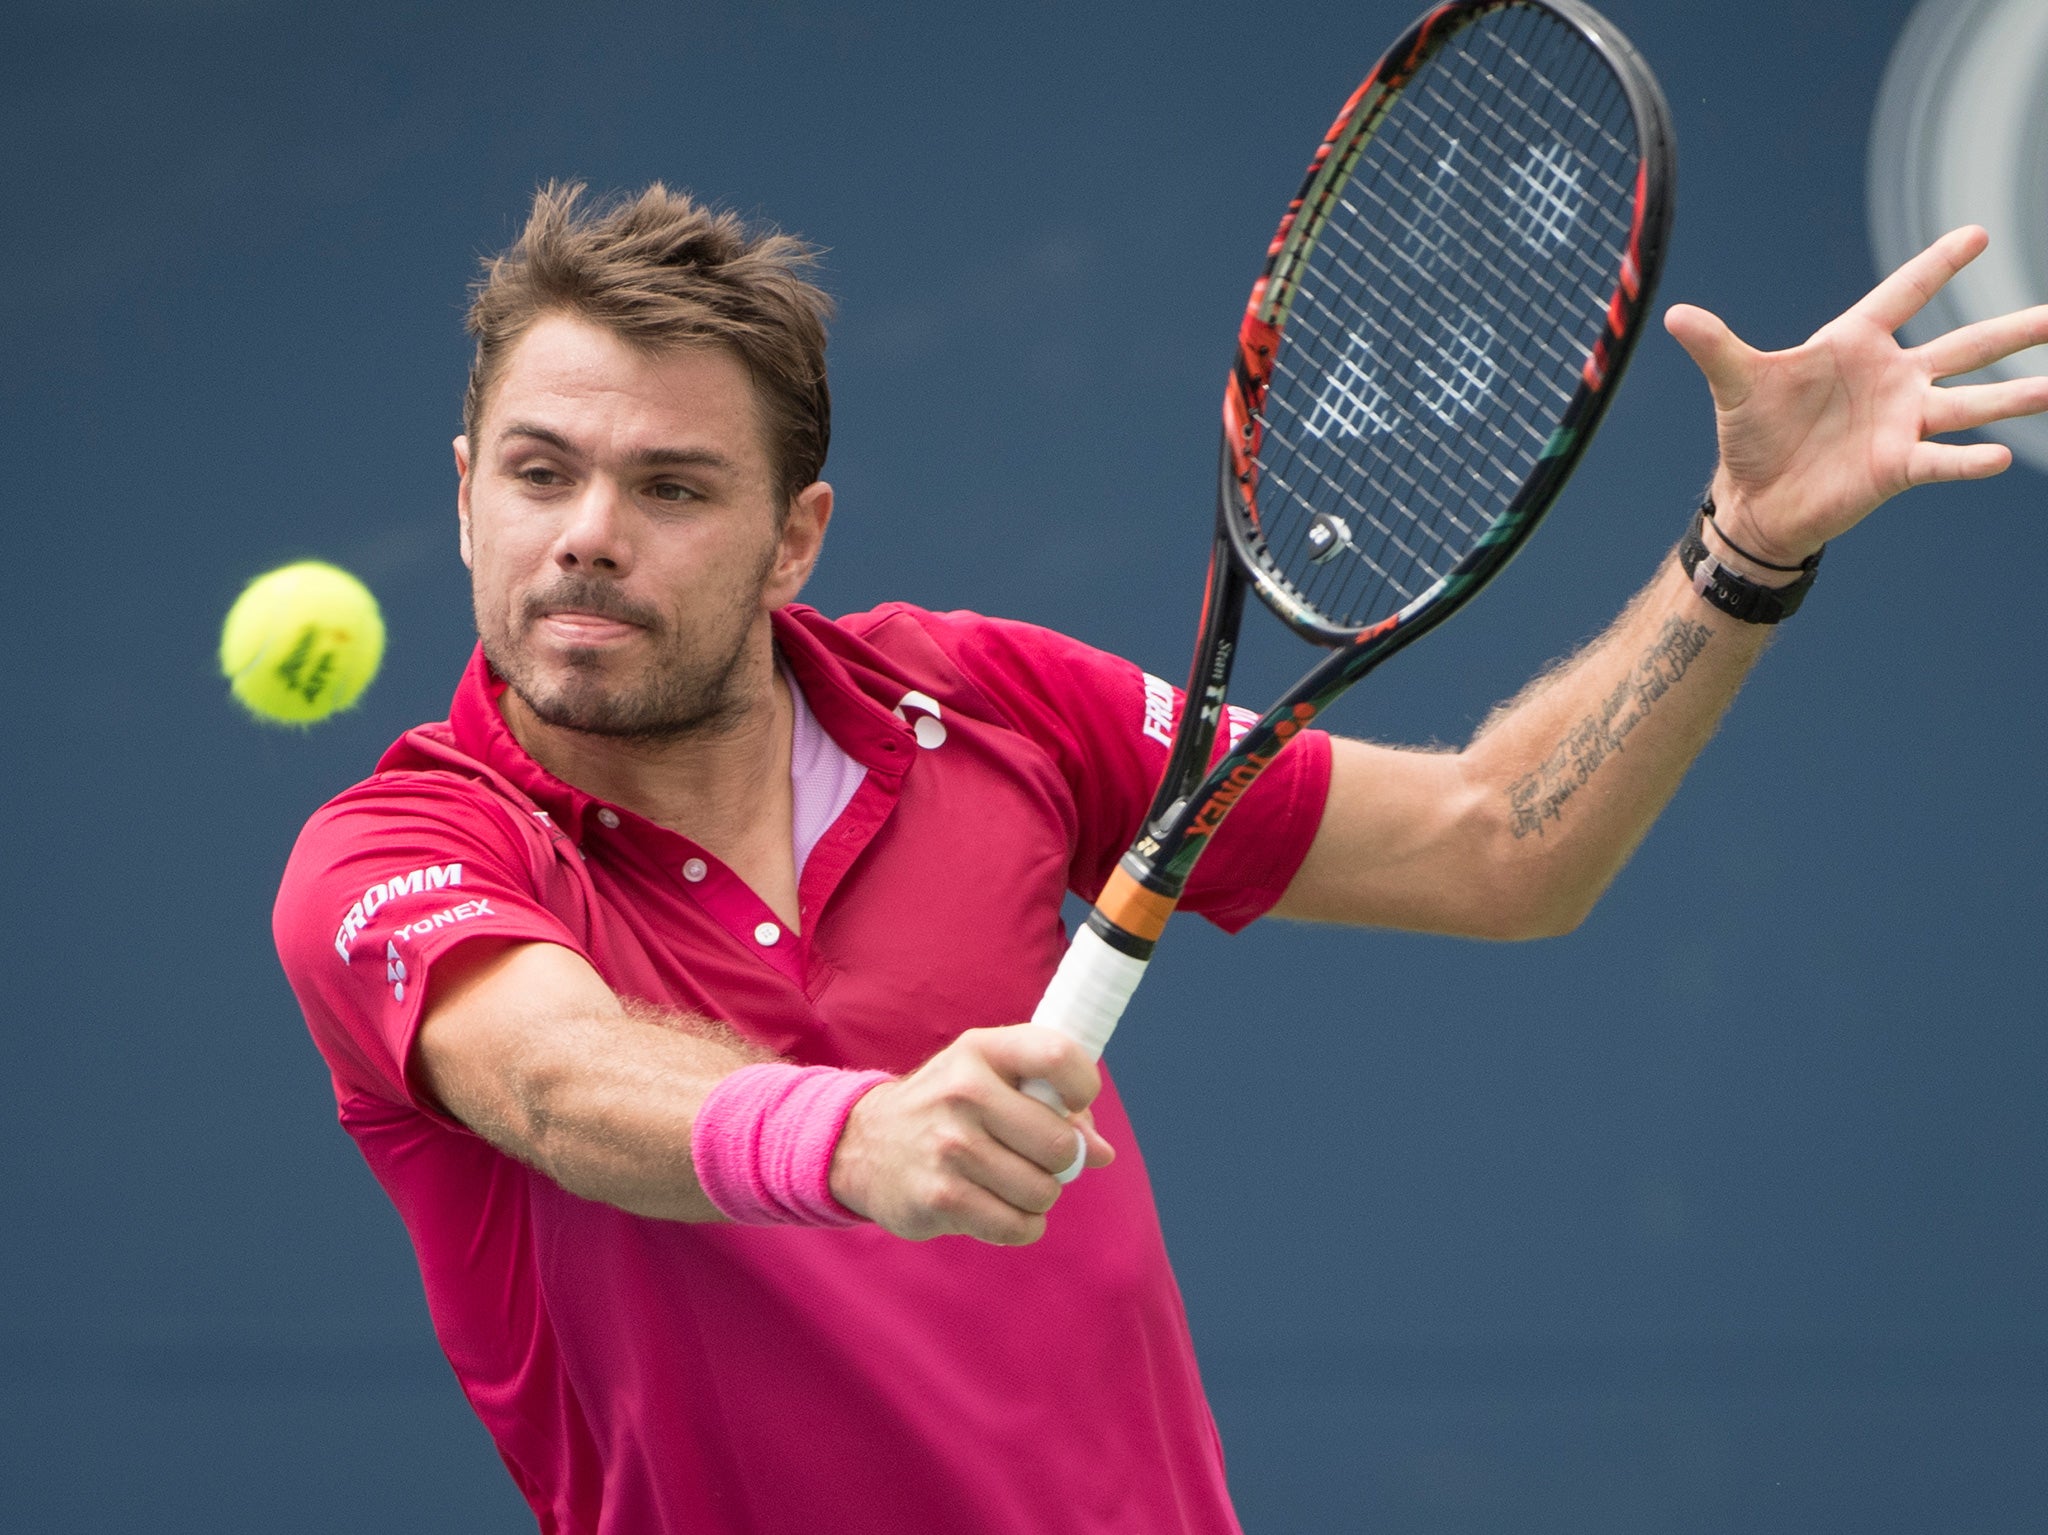 Wawrinka is reportedly struggling with a back injury